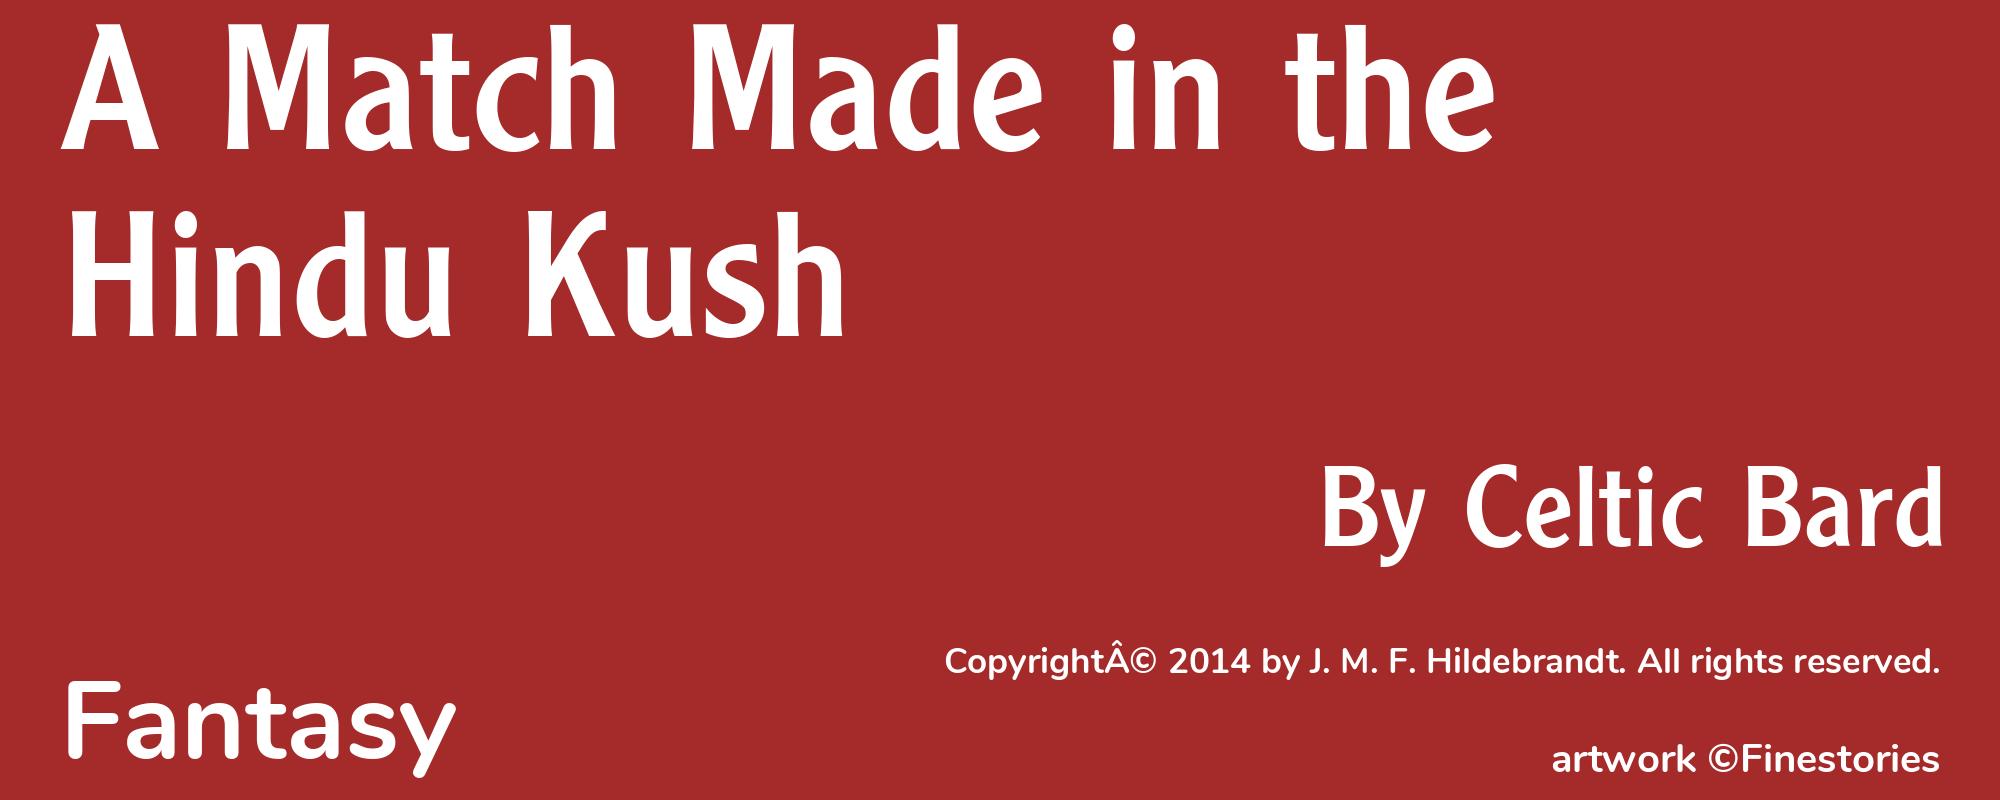 A Match Made in the Hindu Kush - Cover